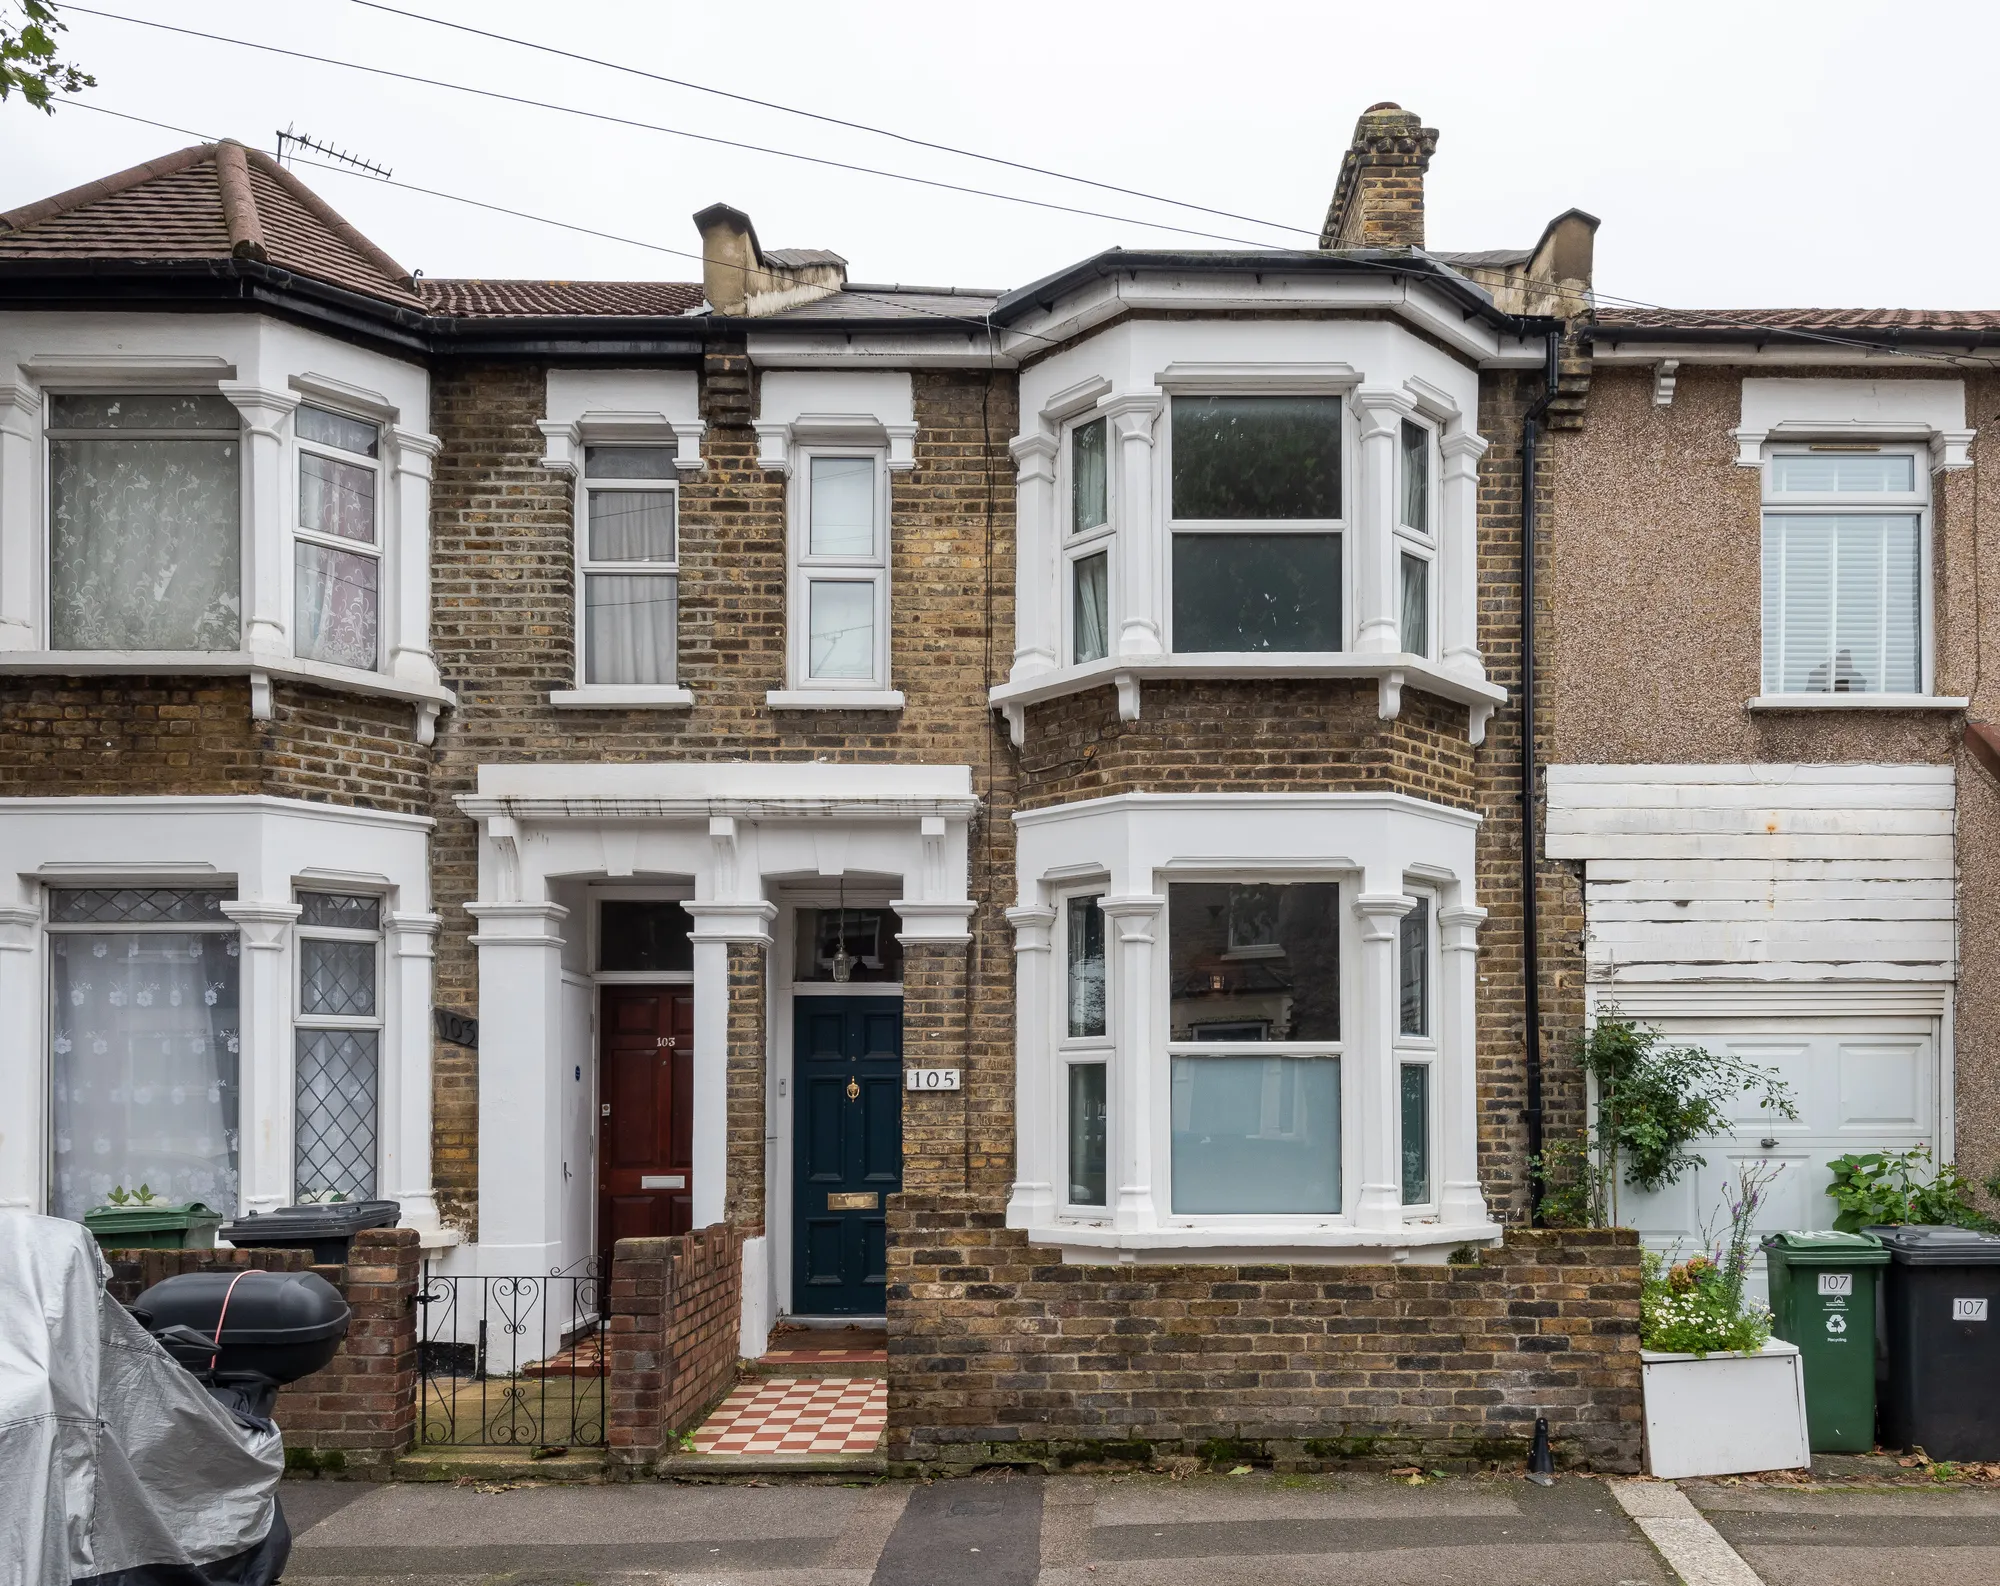 3 bed mid-terraced house for sale in Granleigh Road, Leytonstone - Property Image 1